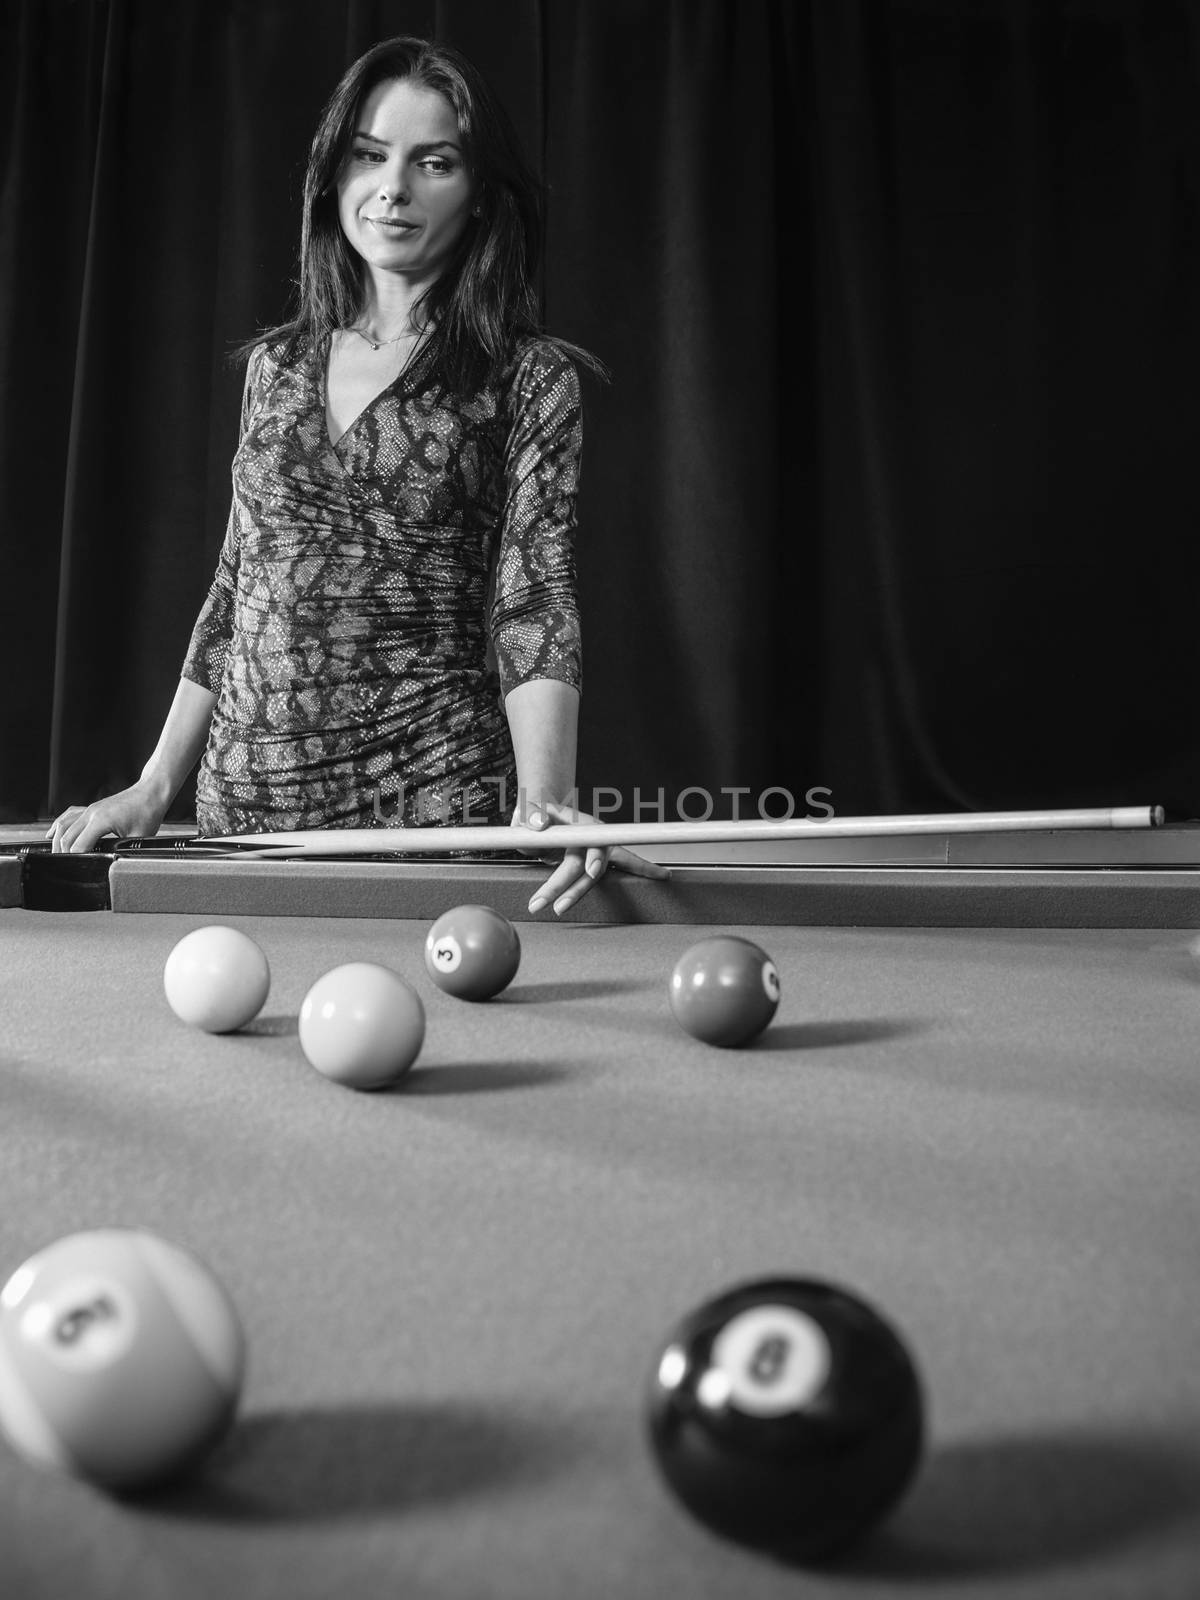 Beautiful woman at the pool table by sumners